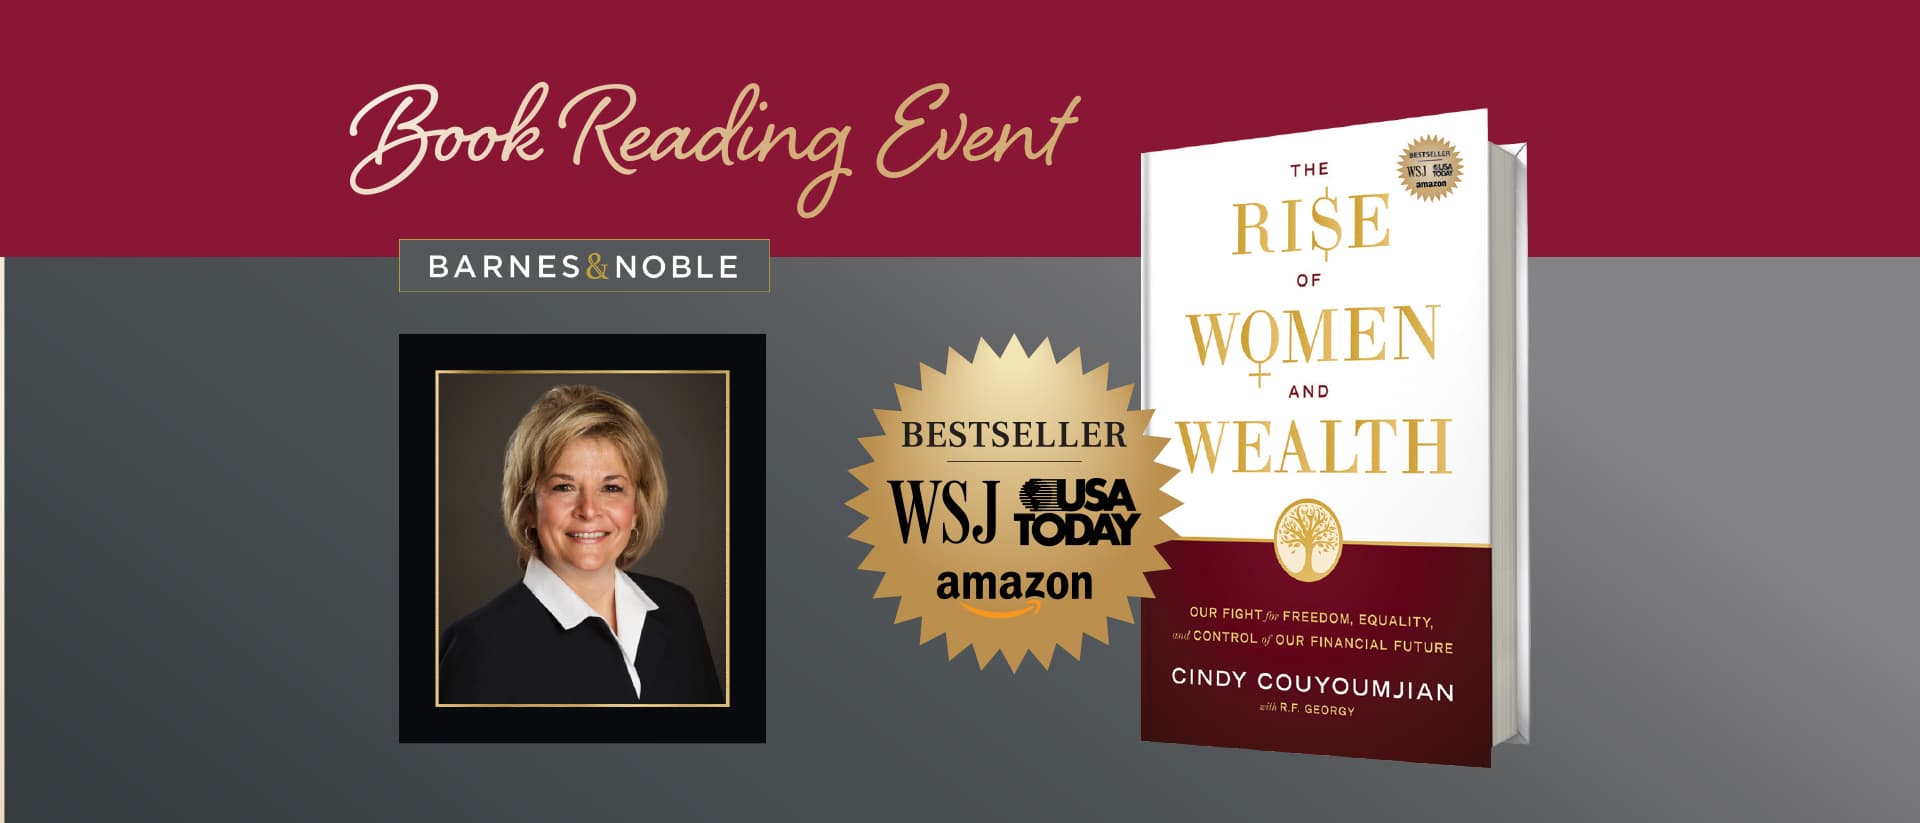 book signing event for cindy couyoumjian